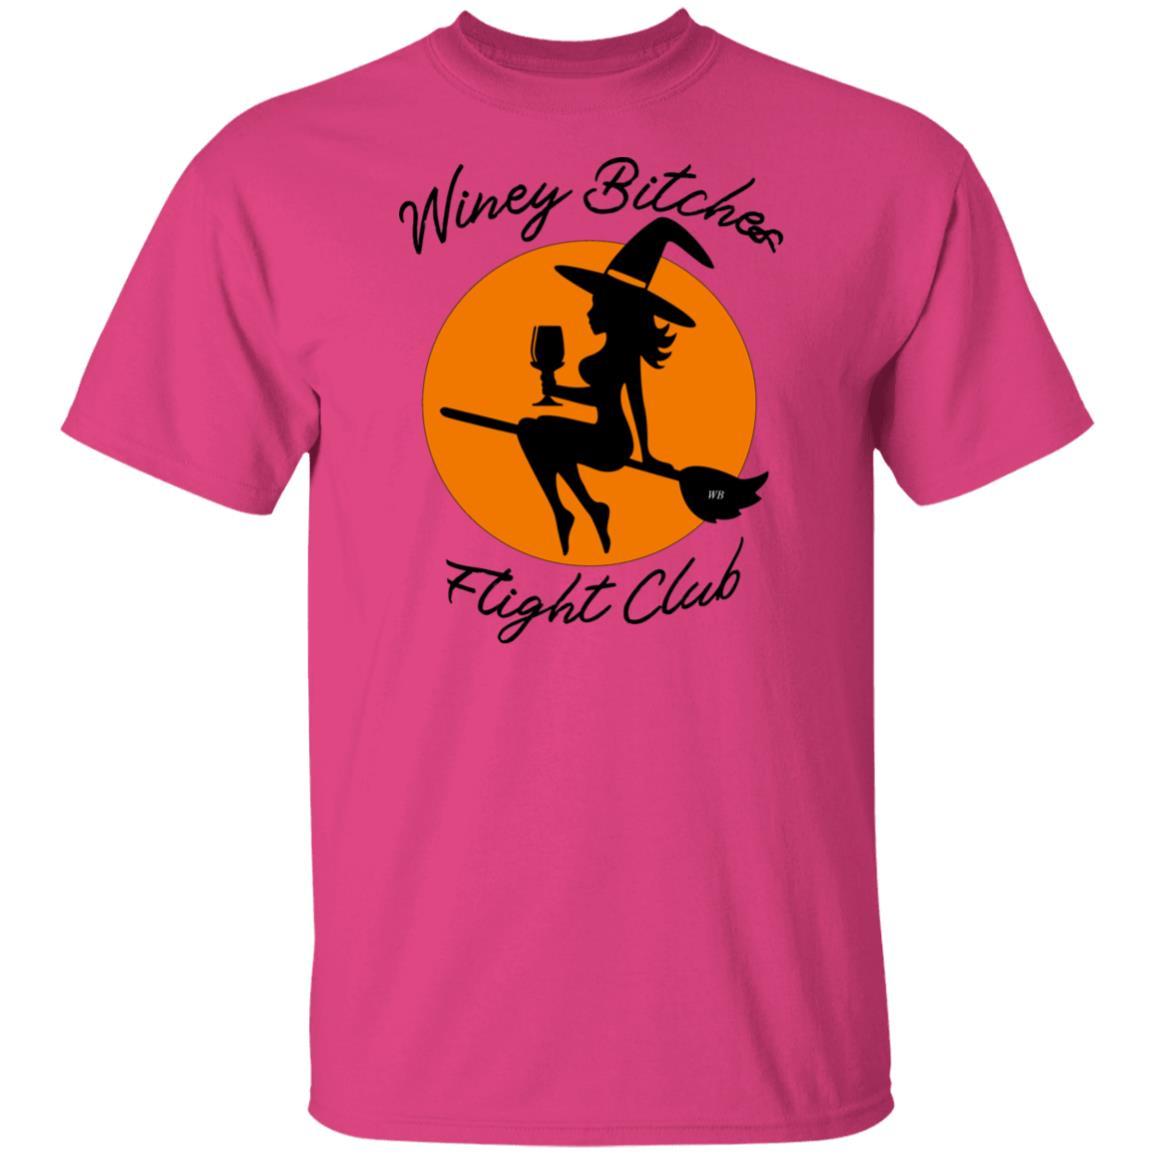 T-Shirts Heliconia / S WineyBitches.Co "Winey Bitches Flight Club" Ultra Cotton T-Shirt WineyBitchesCo